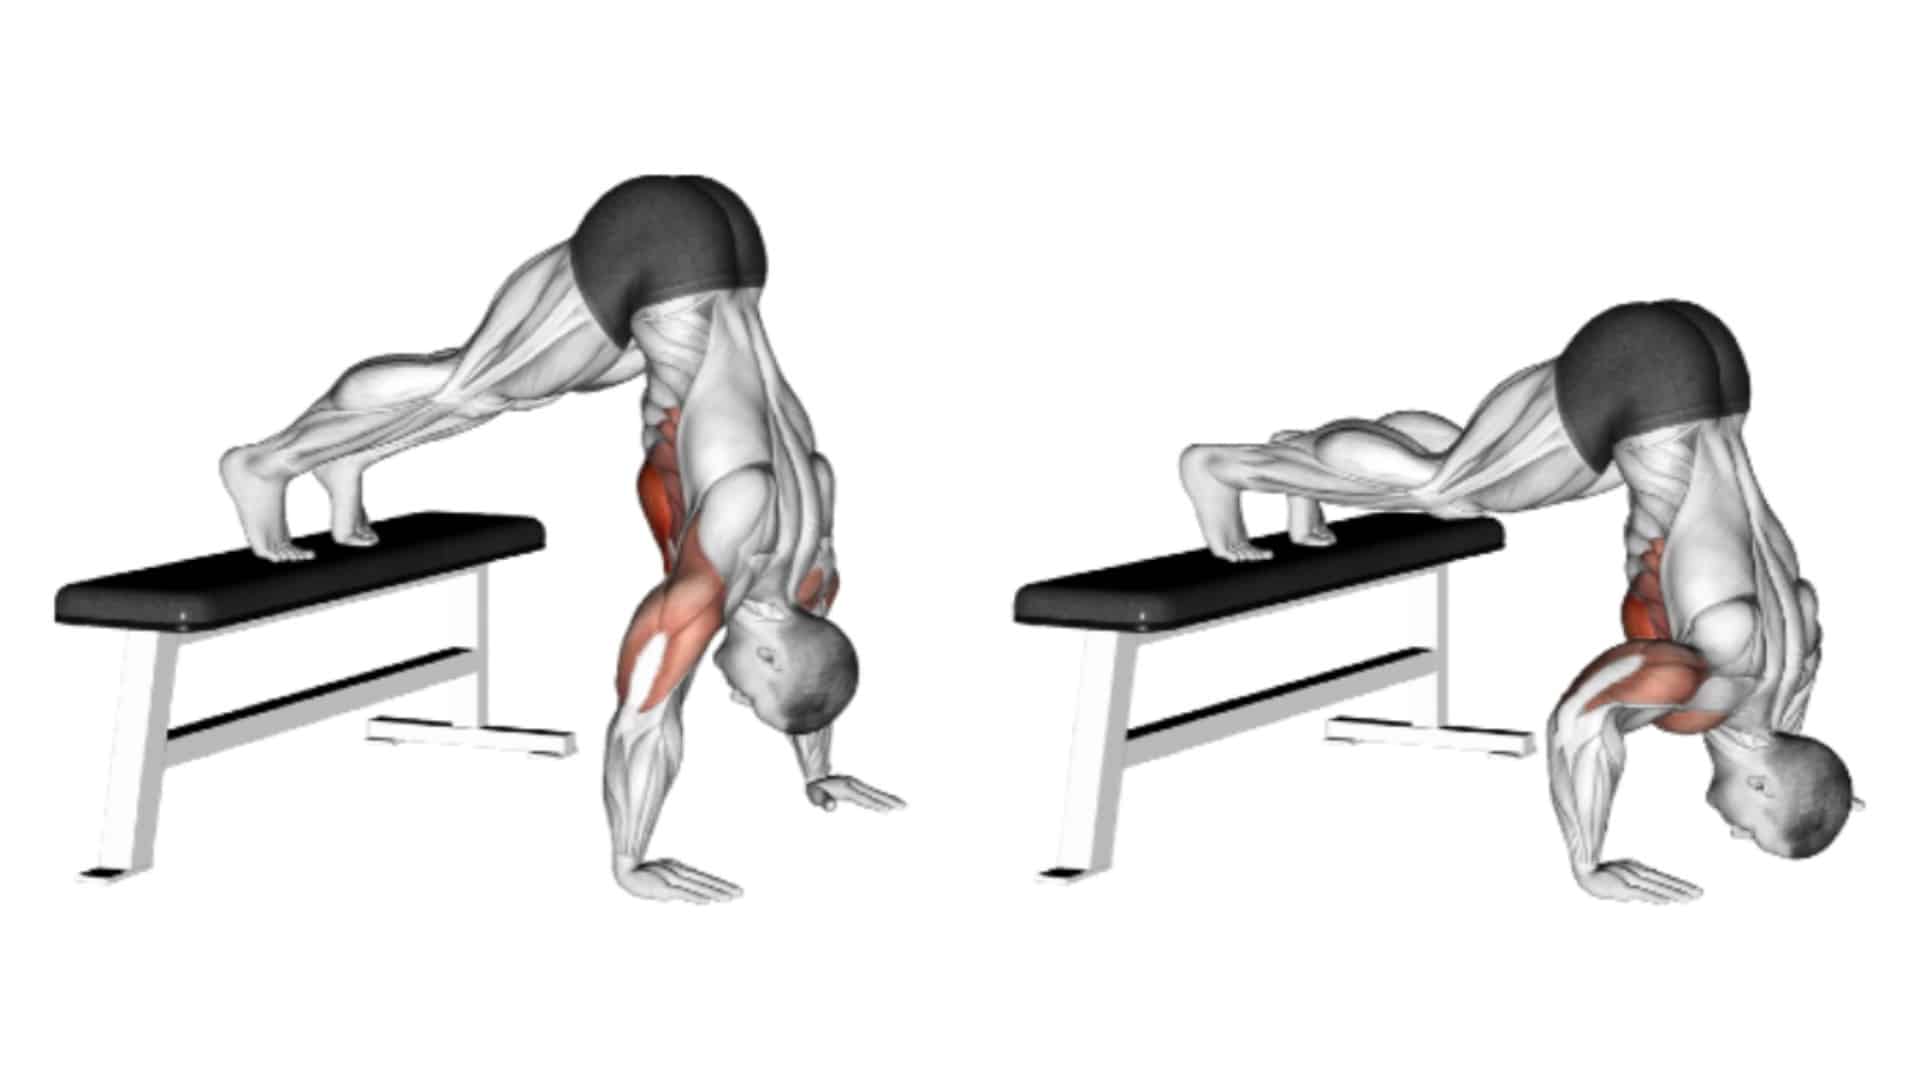 Elevated pike push-up